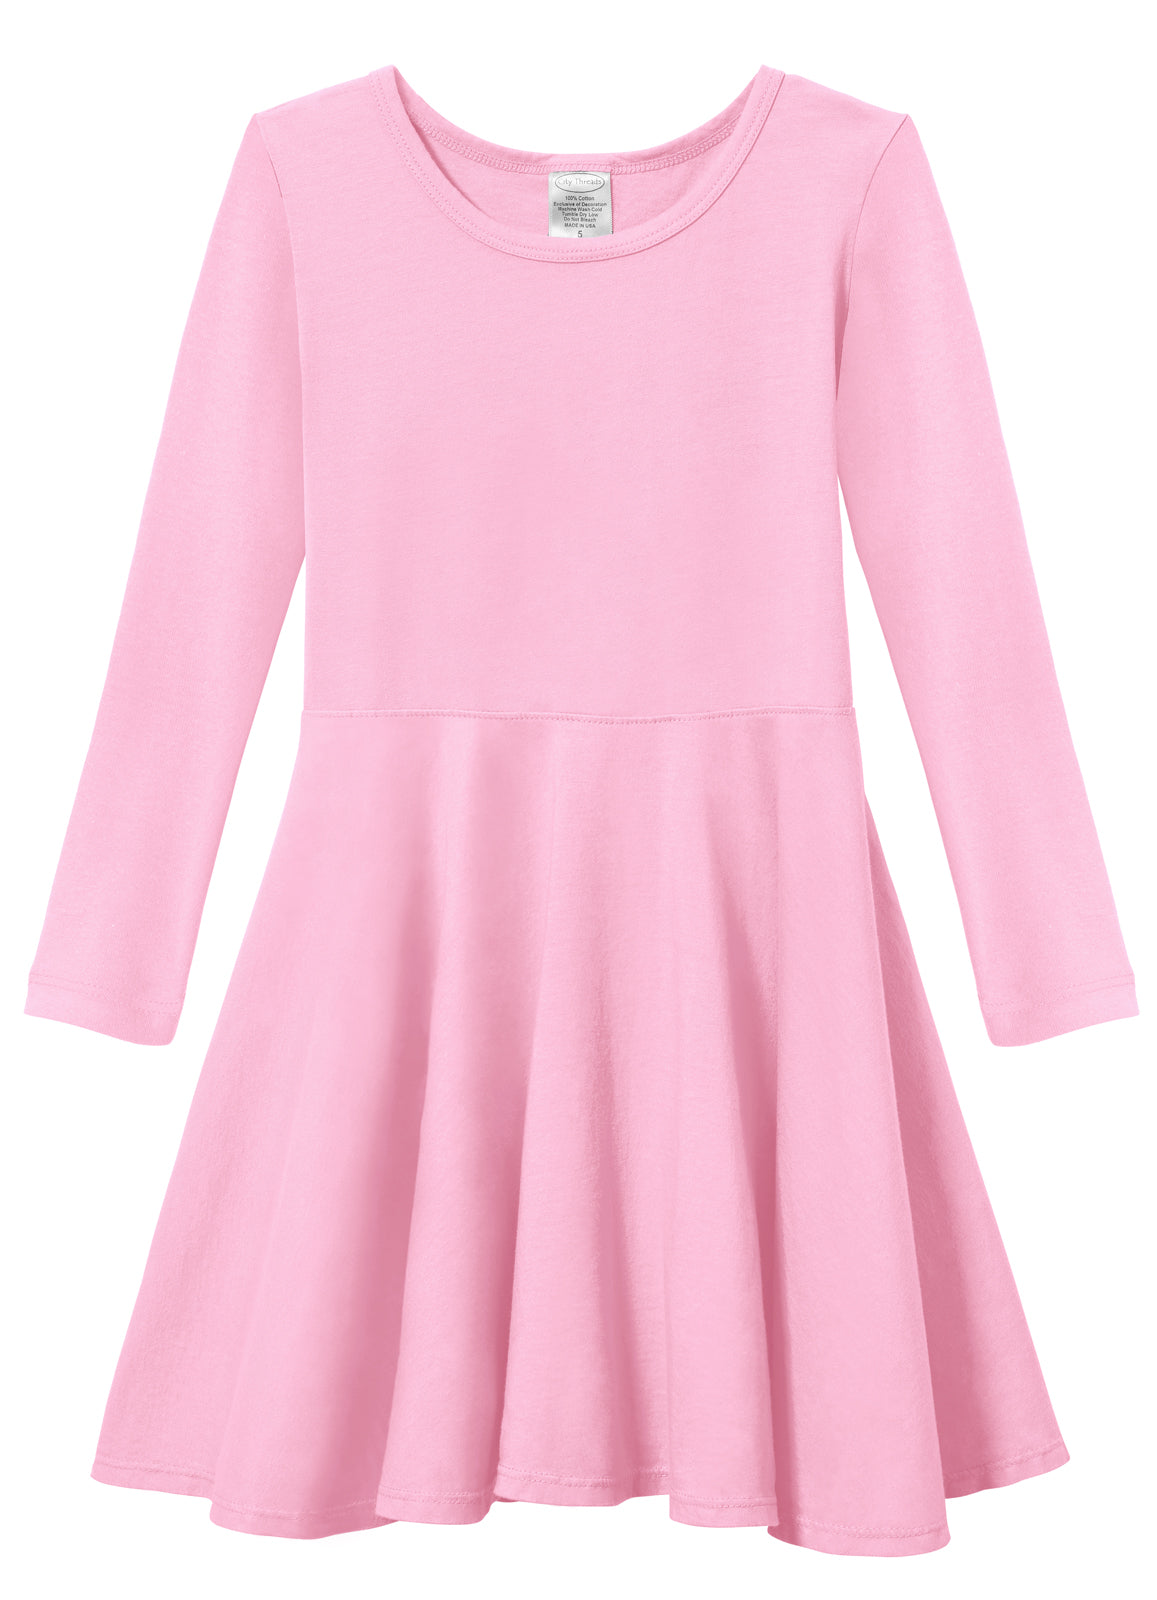 NEW NWT Girls Large 10 / 12 Stretchy Cotton Light Pink Skater Dress ART  CLASS on eBid United States